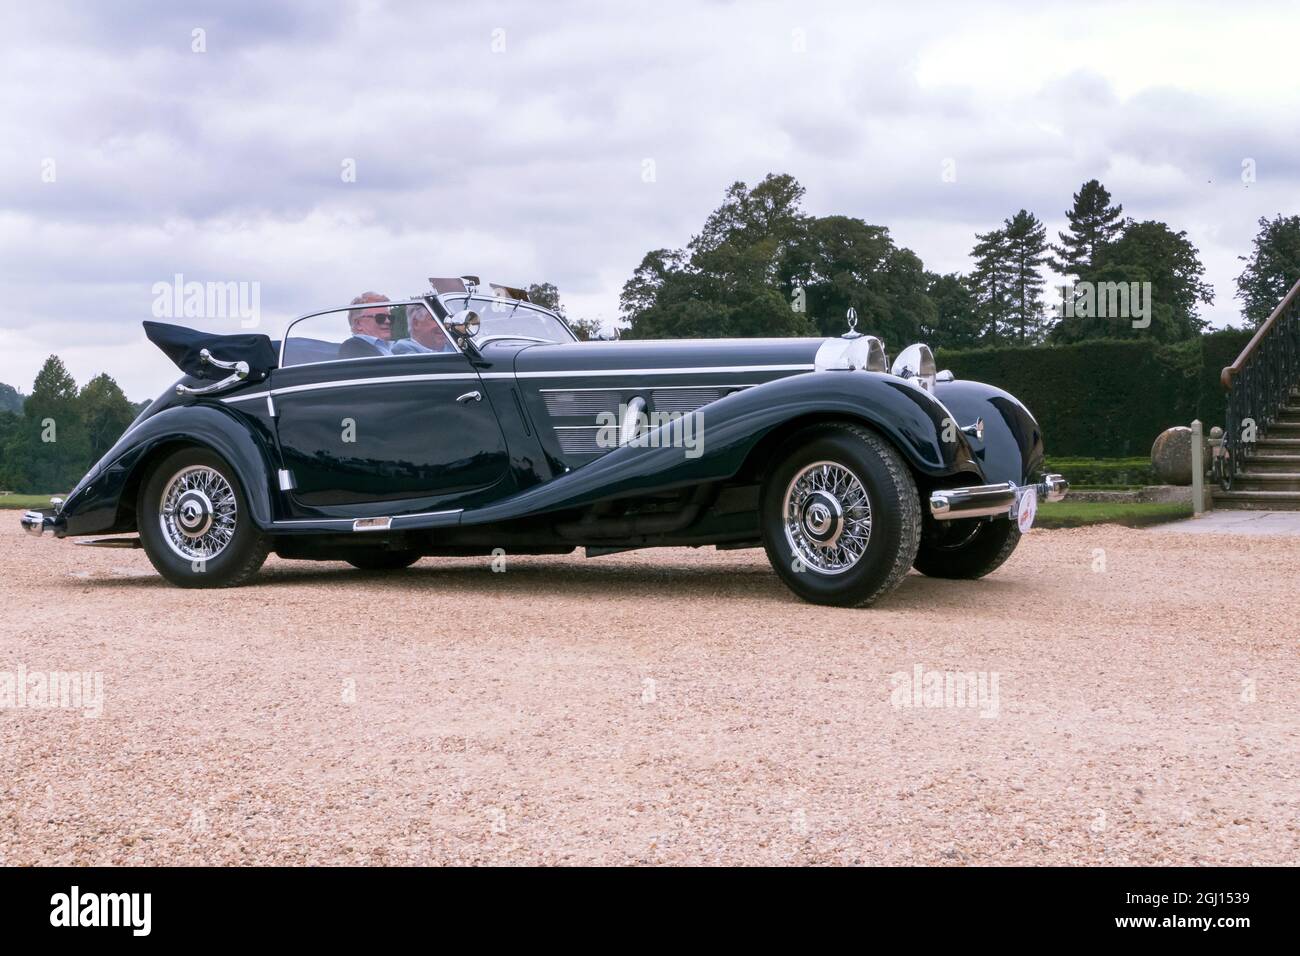 1938 Mercedes-Benz 540K Cabriolet winner of 'Best In Show' at the 2021 Salon Prive Concours D'Elegance at Blenheim Palace Woodstock Oxfordshire UK Stock Photo